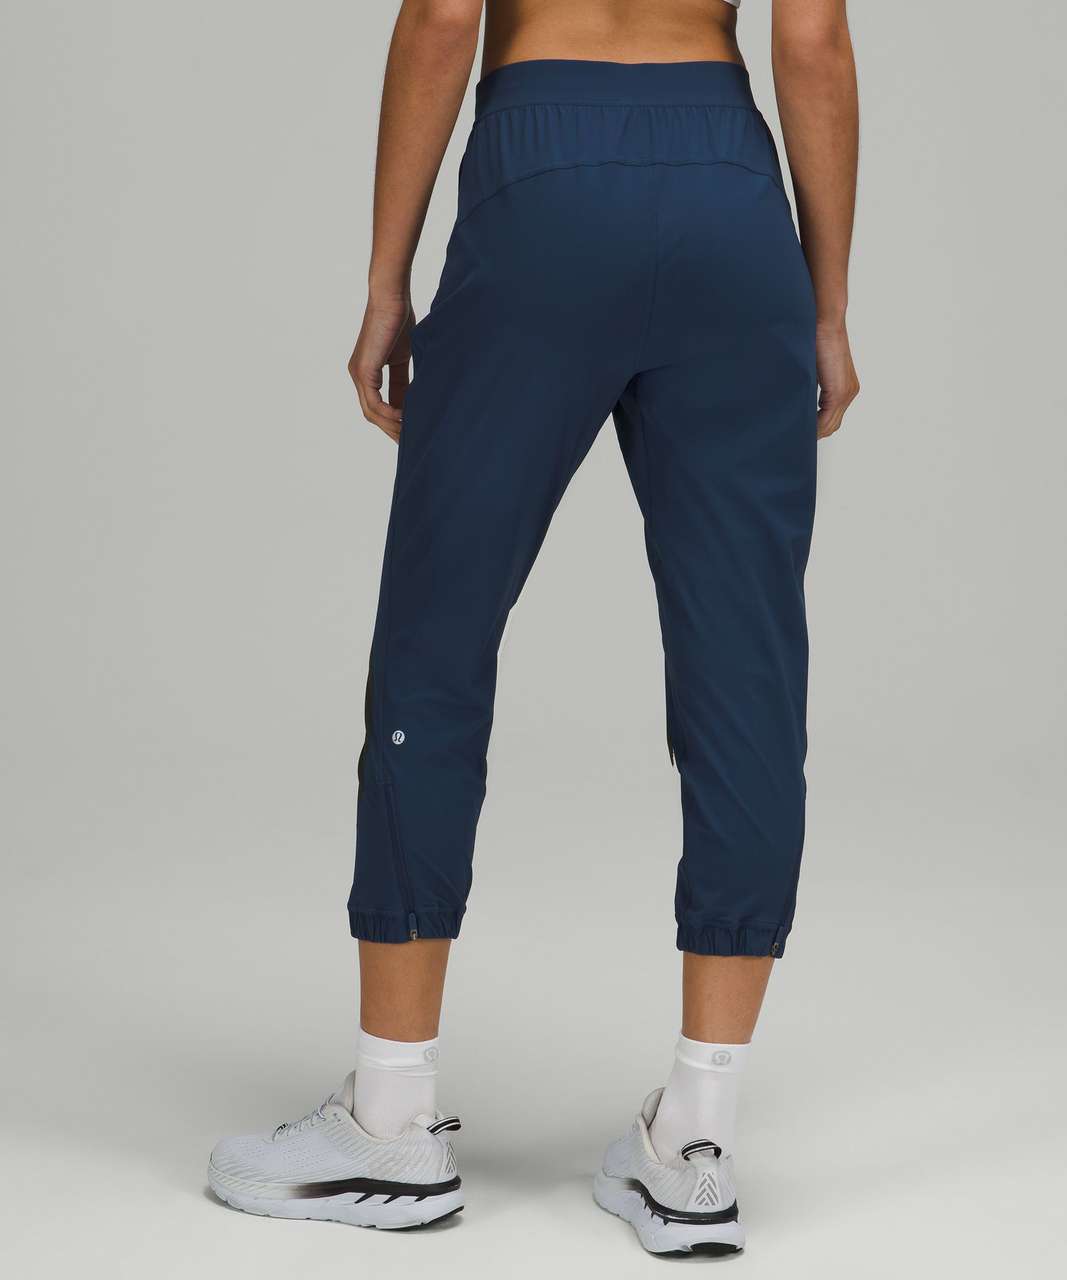 Lululemon Adapted State High-Rise Jogger Crop 23" - Mineral Blue